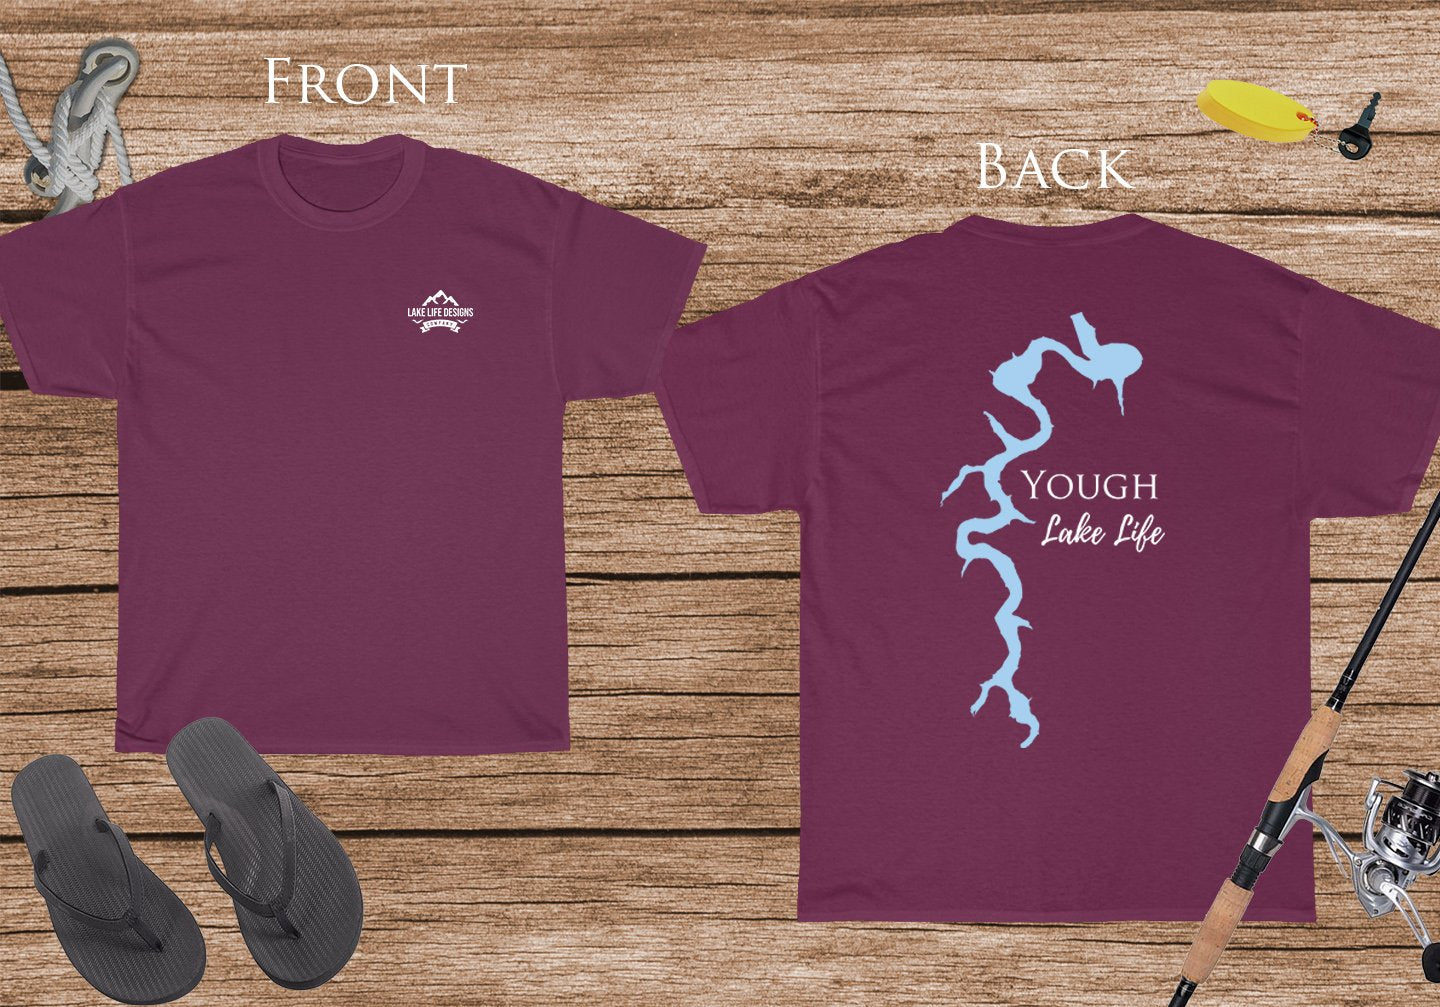 Yough Lake Life - Cotton Short Sleeved - FRONT & BACK PRINTED - Short Sleeved Cotton Tee - Maryland Lake